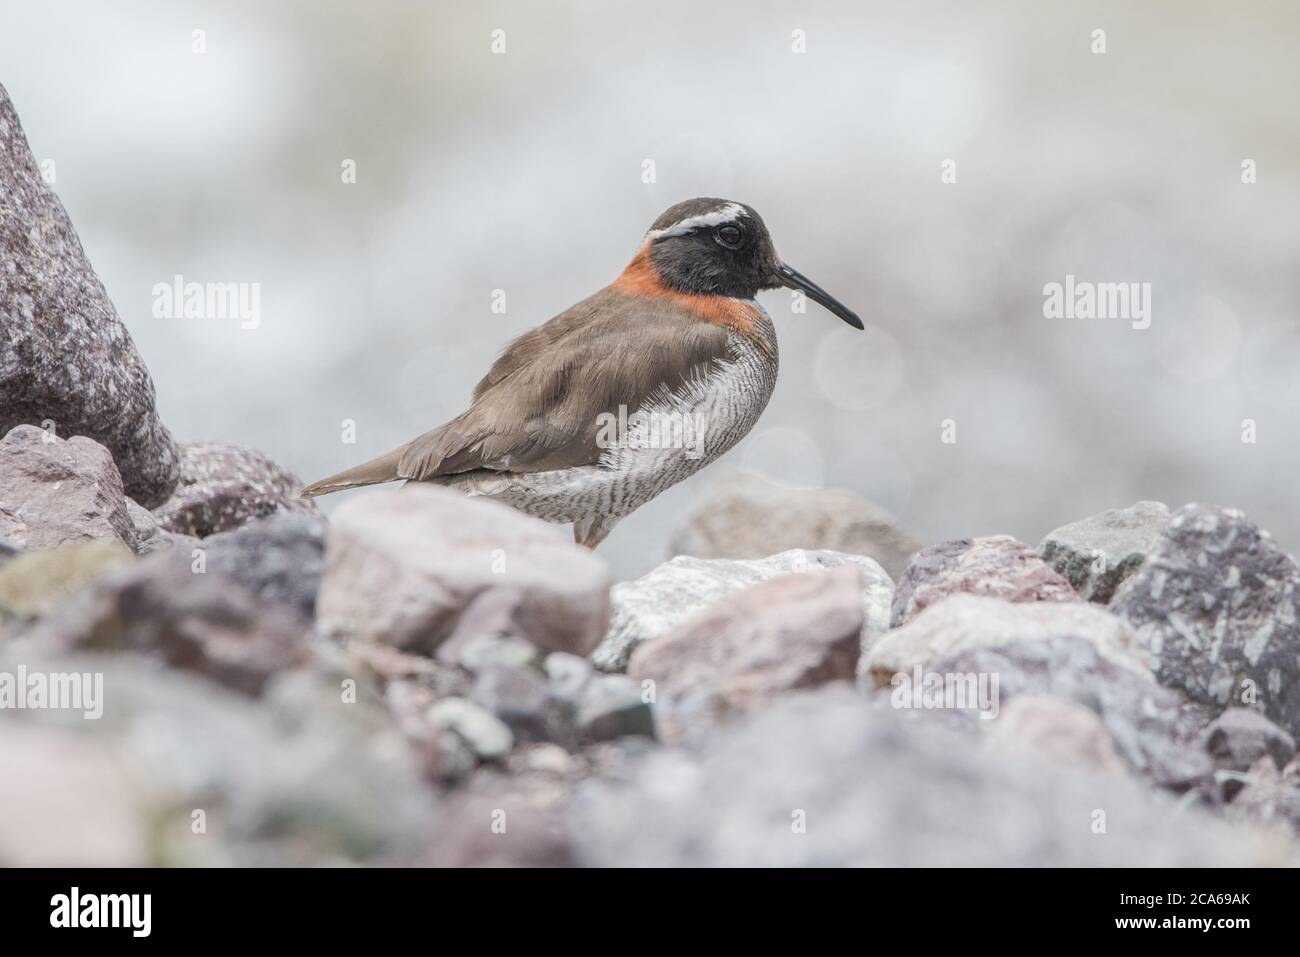 The diademed sandpiper plover (Phegornis mitchellii), an elusive little bird from the high Andes in Southern Peru. Stock Photo